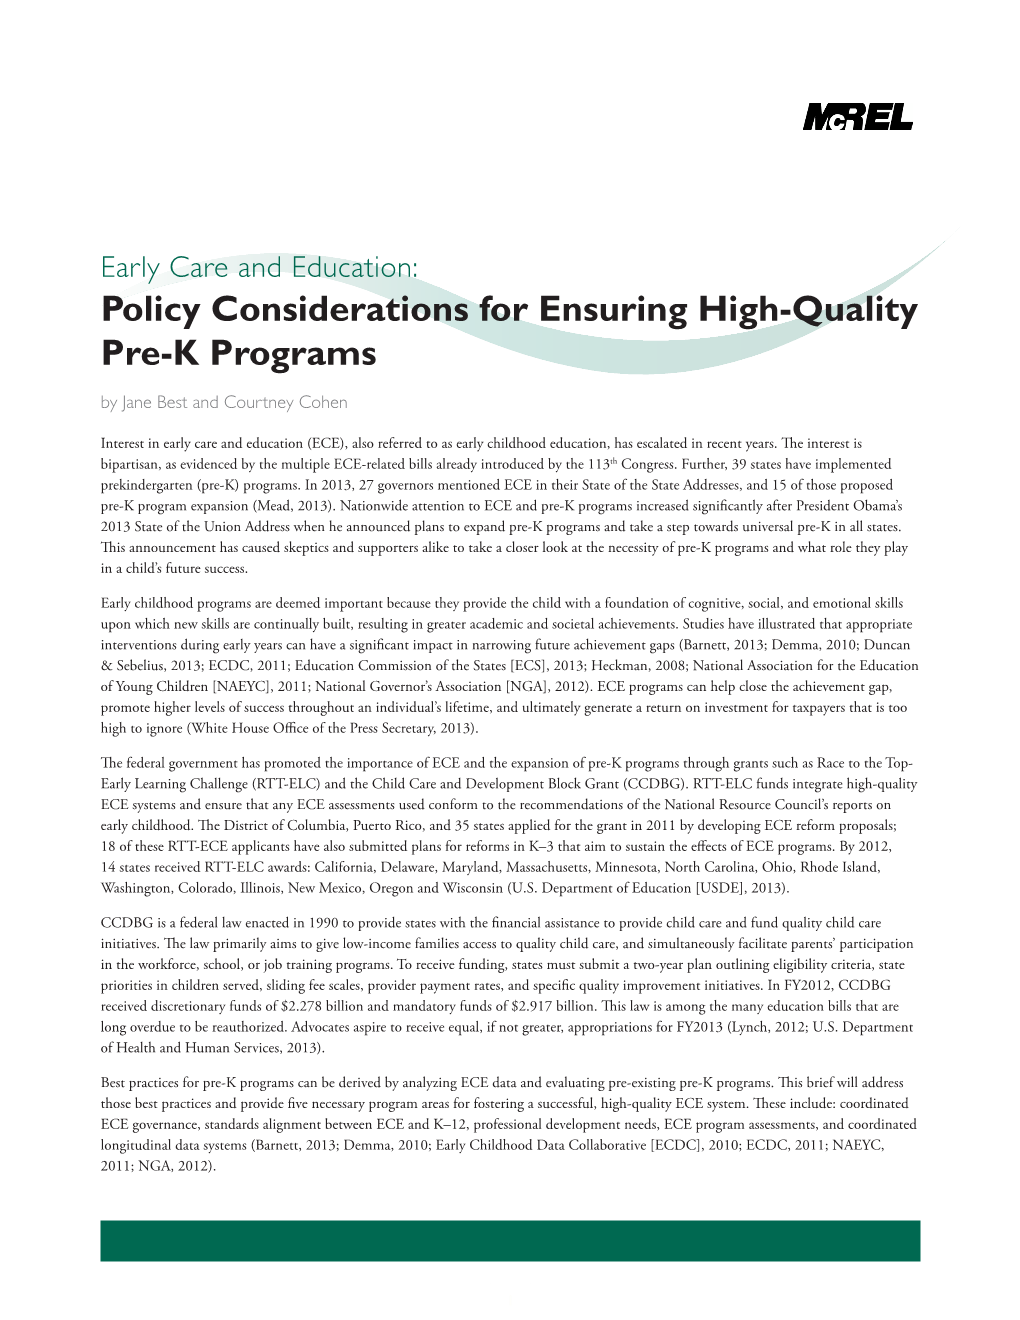 Early Care and Education: Policy Considerations for Ensuring High-Quality Pre-K Programs by Jane Best and Courtney Cohen